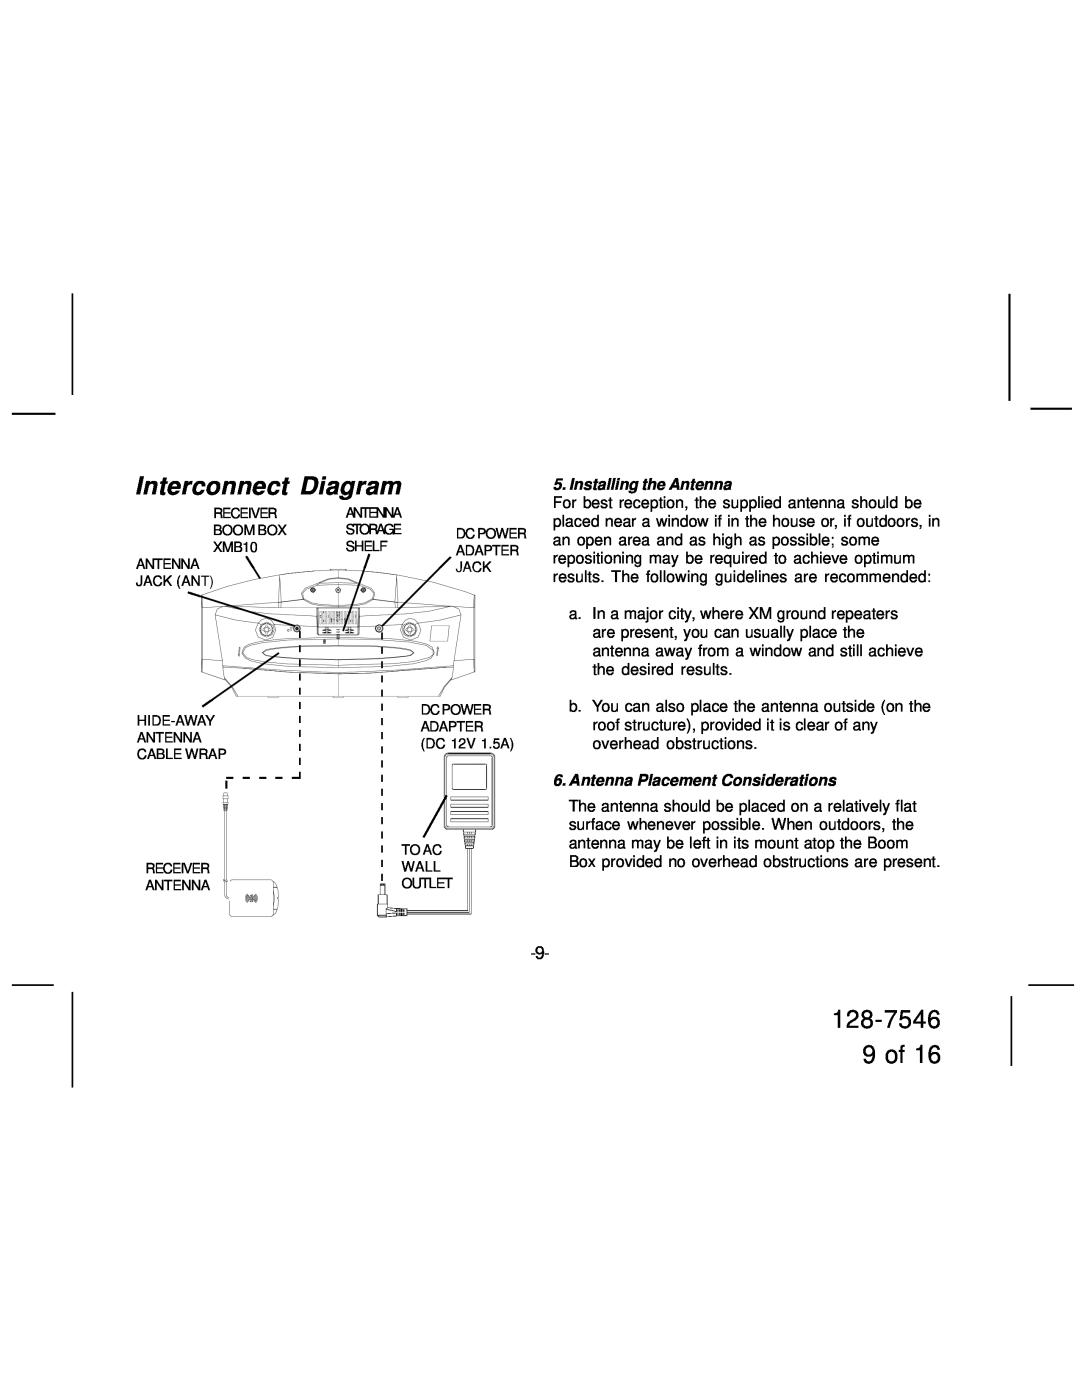 Audiovox XMB10 manual Interconnect Diagram, 128-7546 9 of, Installing the Antenna, Antenna Placement Considerations 